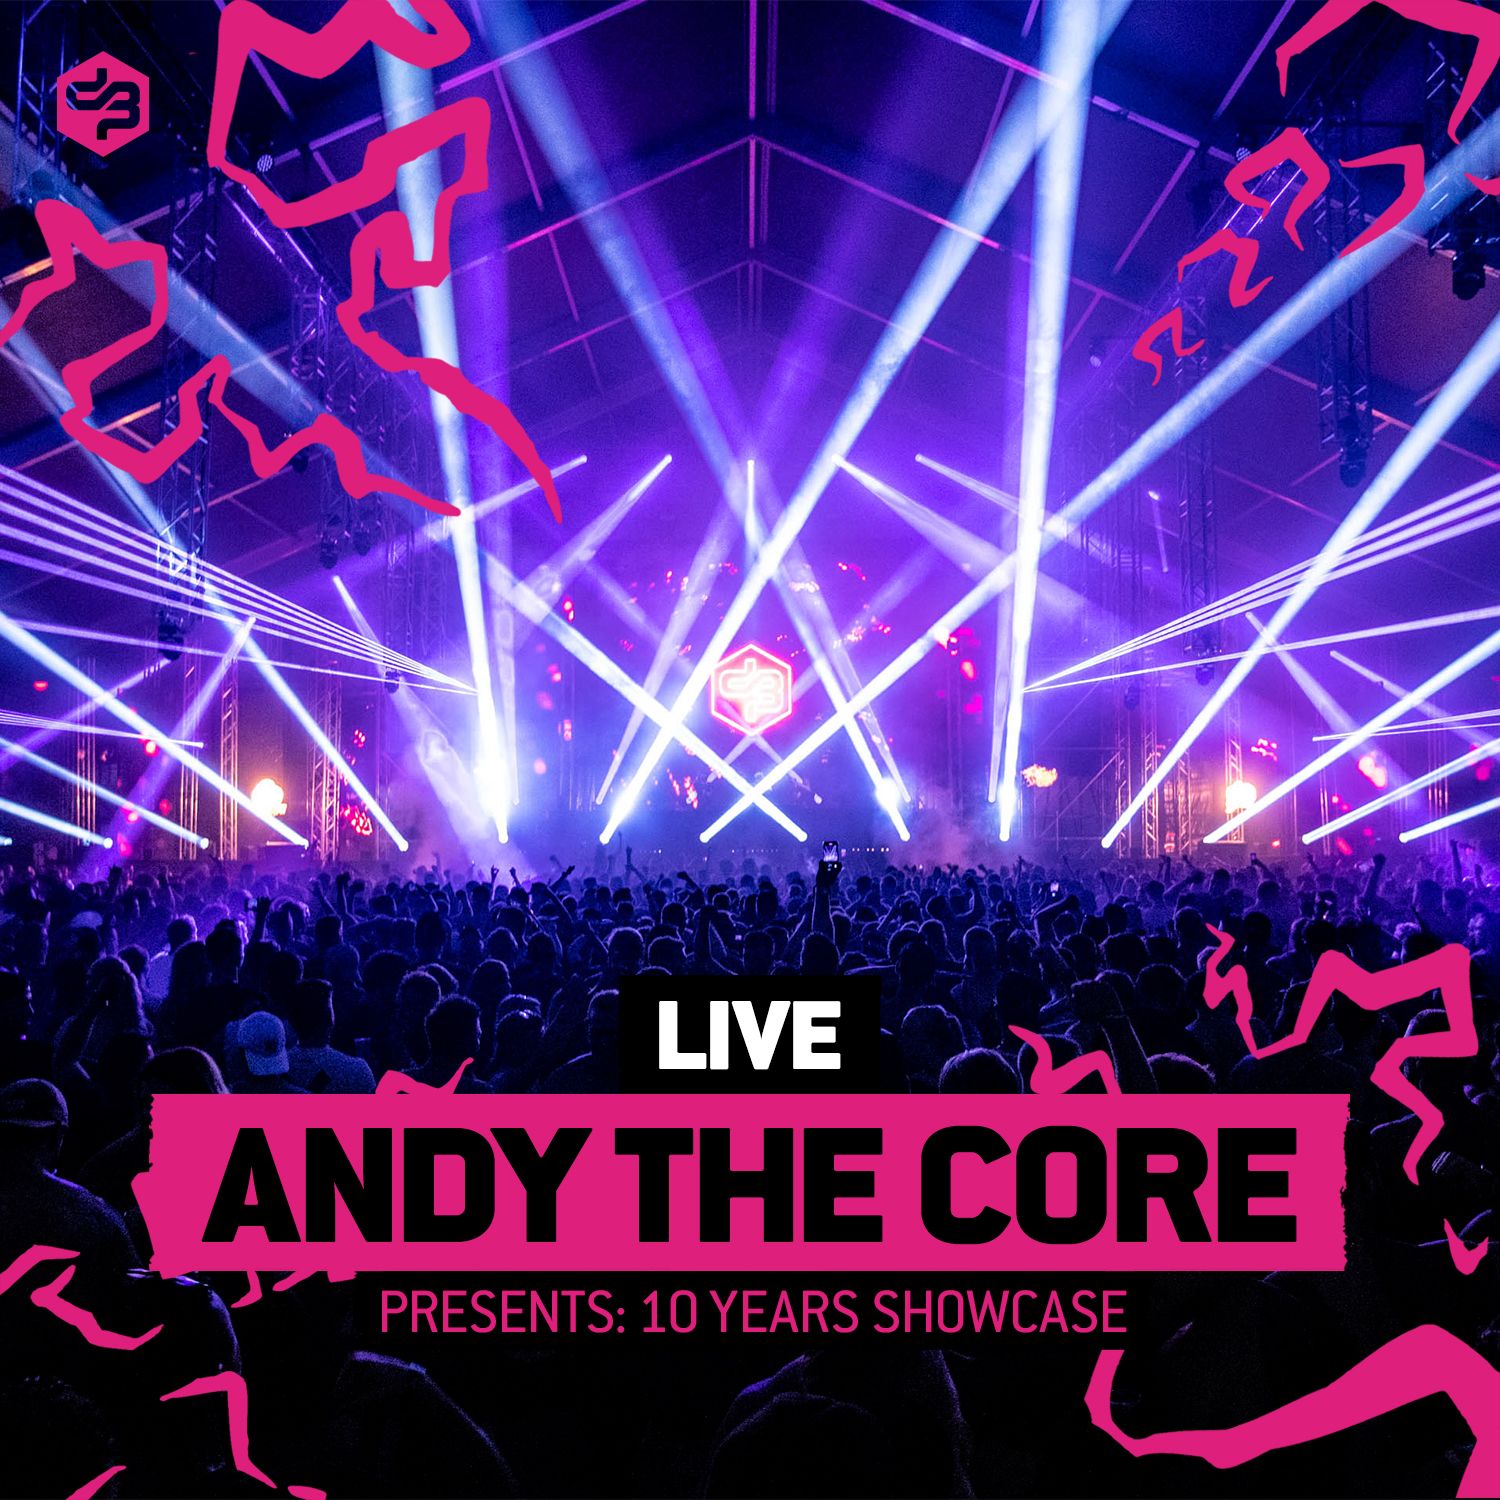 Andy The Core presents: 10 Years Showcase | Decibel outdoor 2022 | Hardcore | Friday